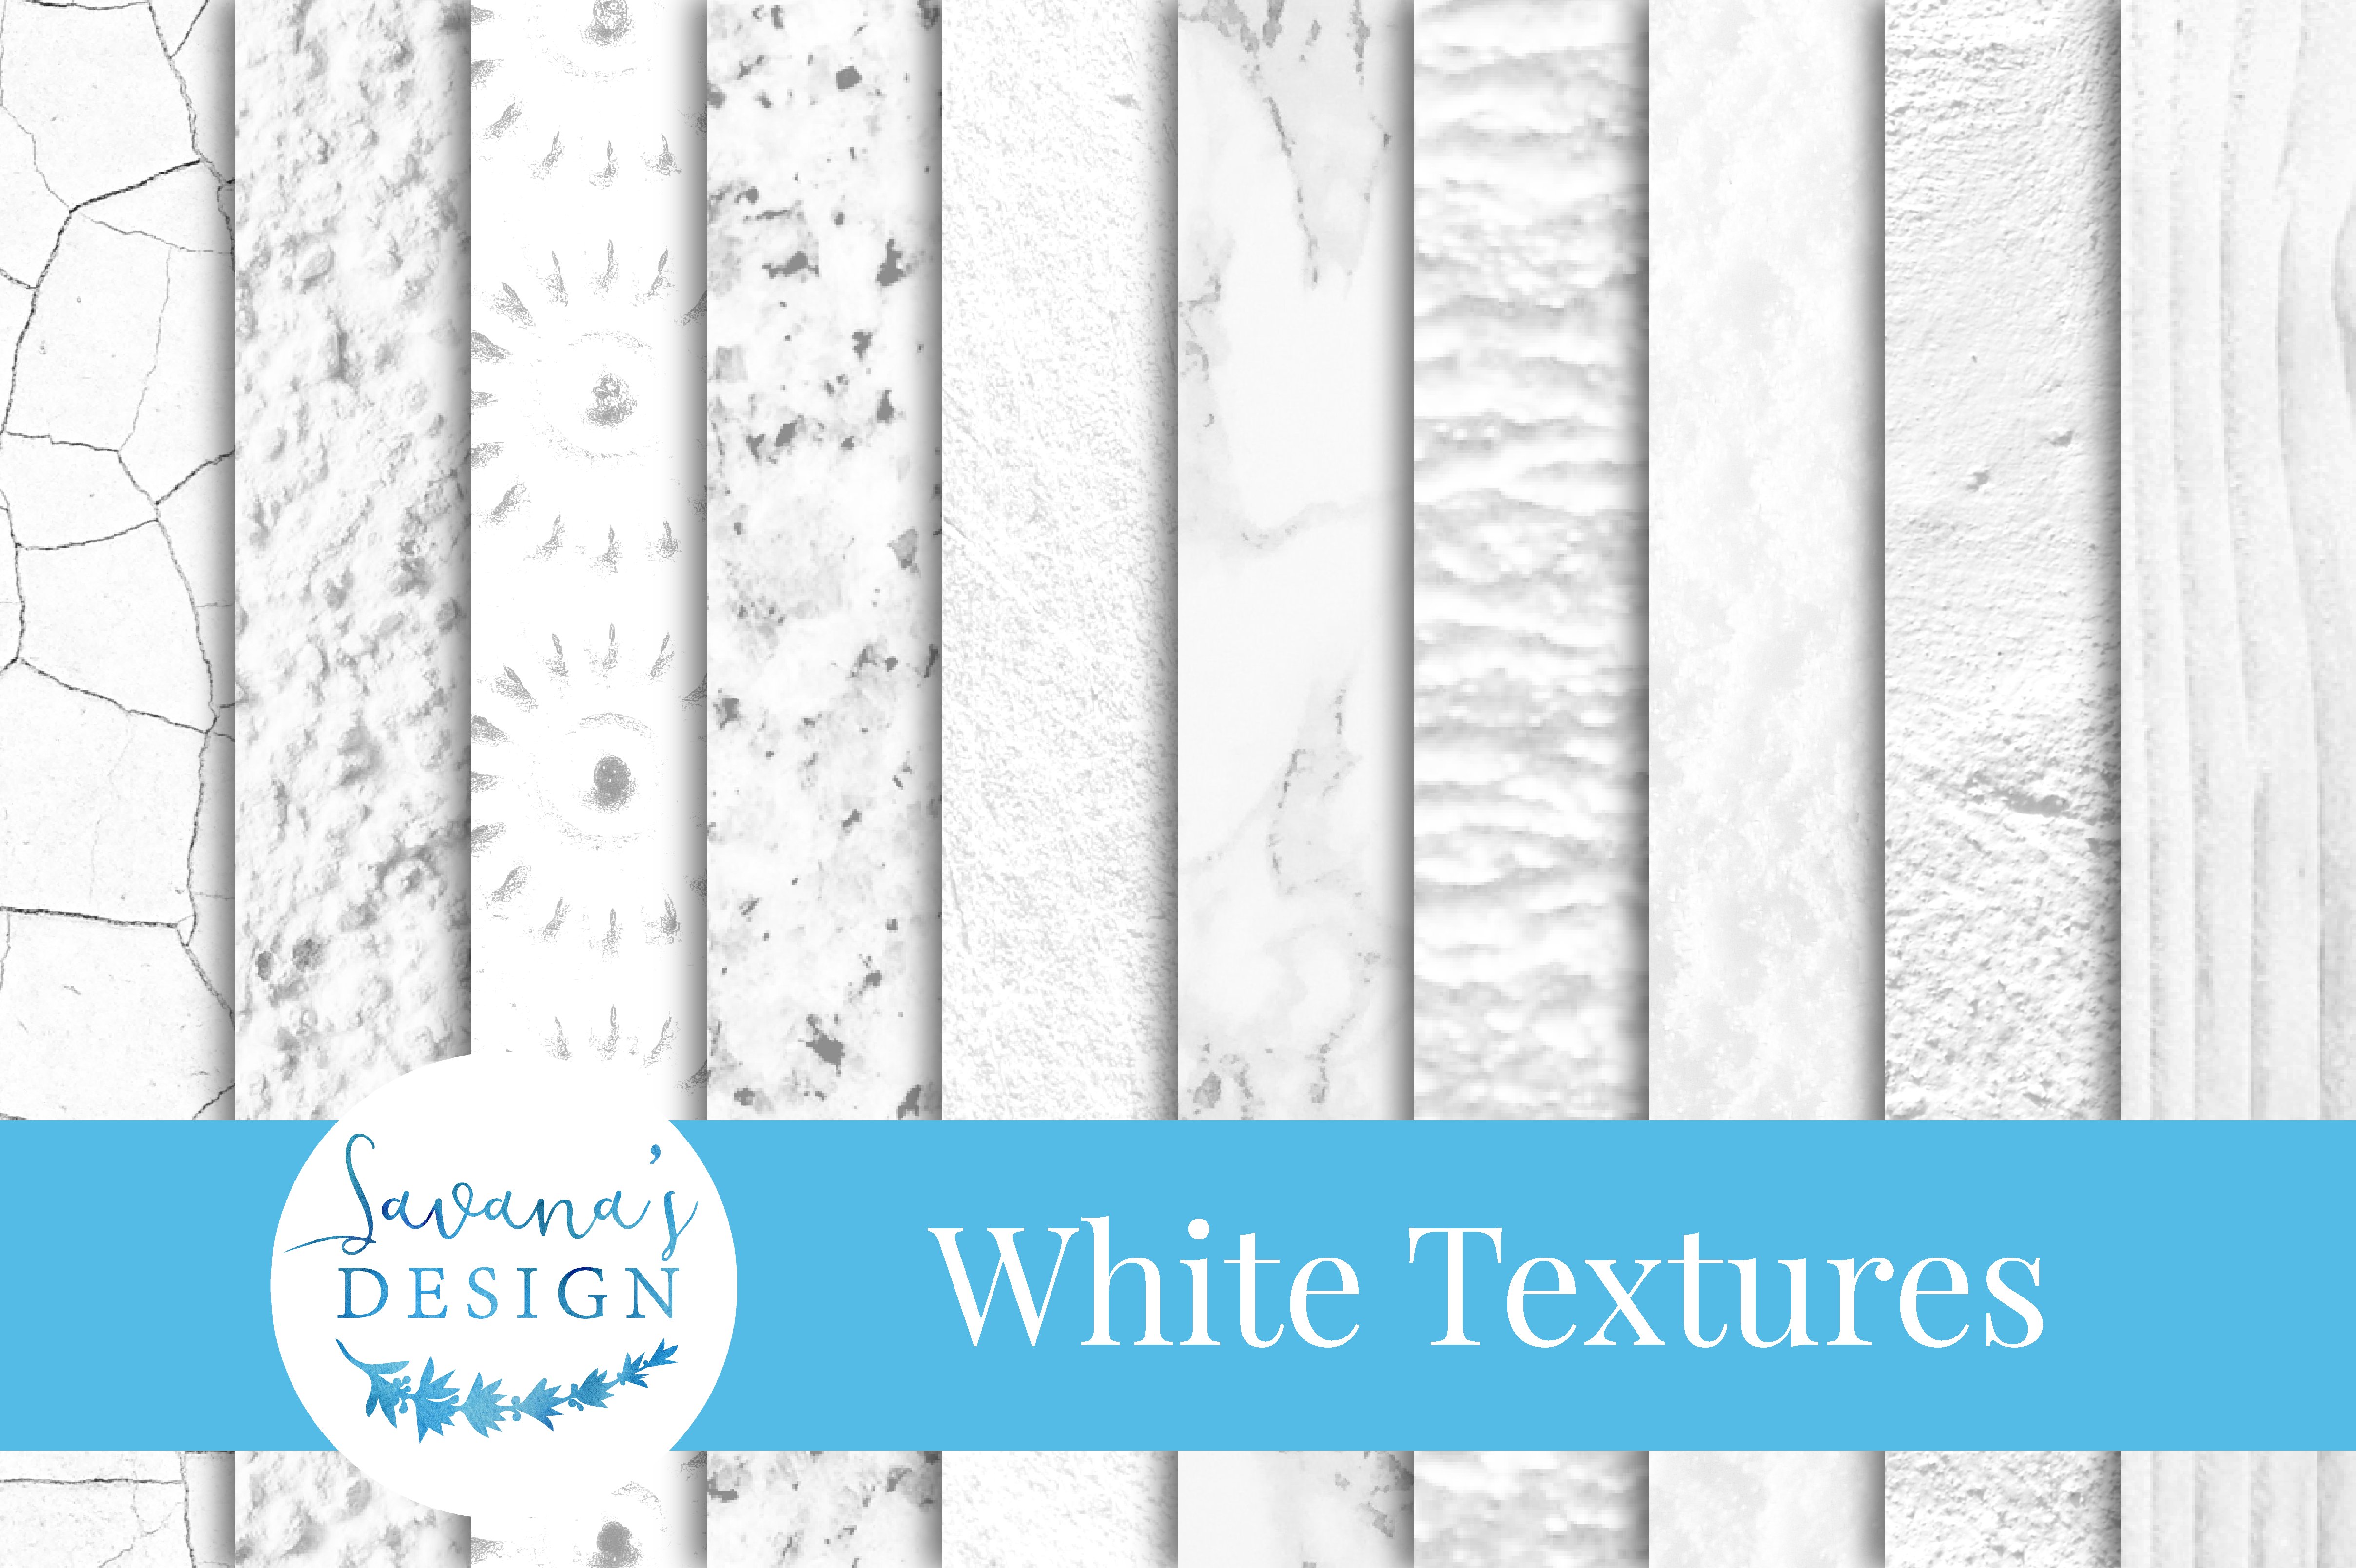 White Texture Paper Pack cover image.